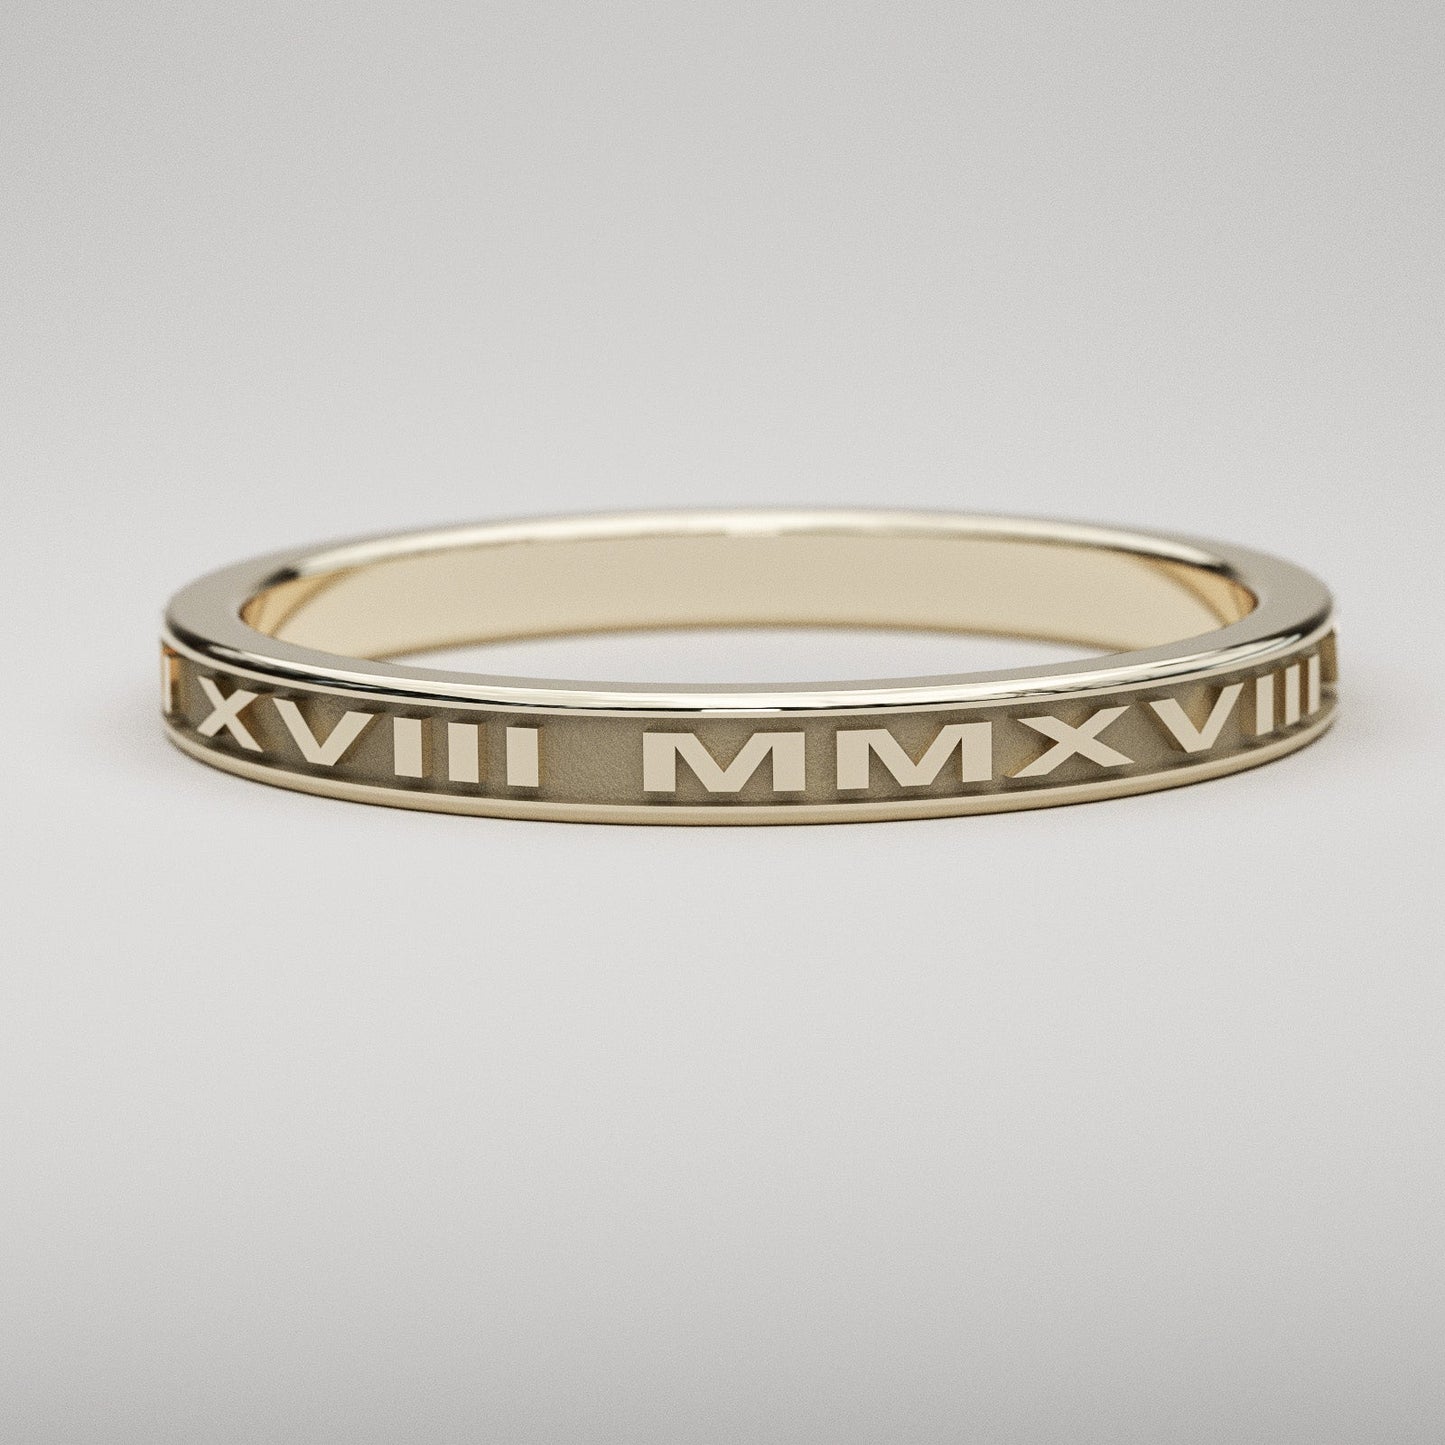 Custom date ring in 14k yellow gold featuring your date in Roman Numerals